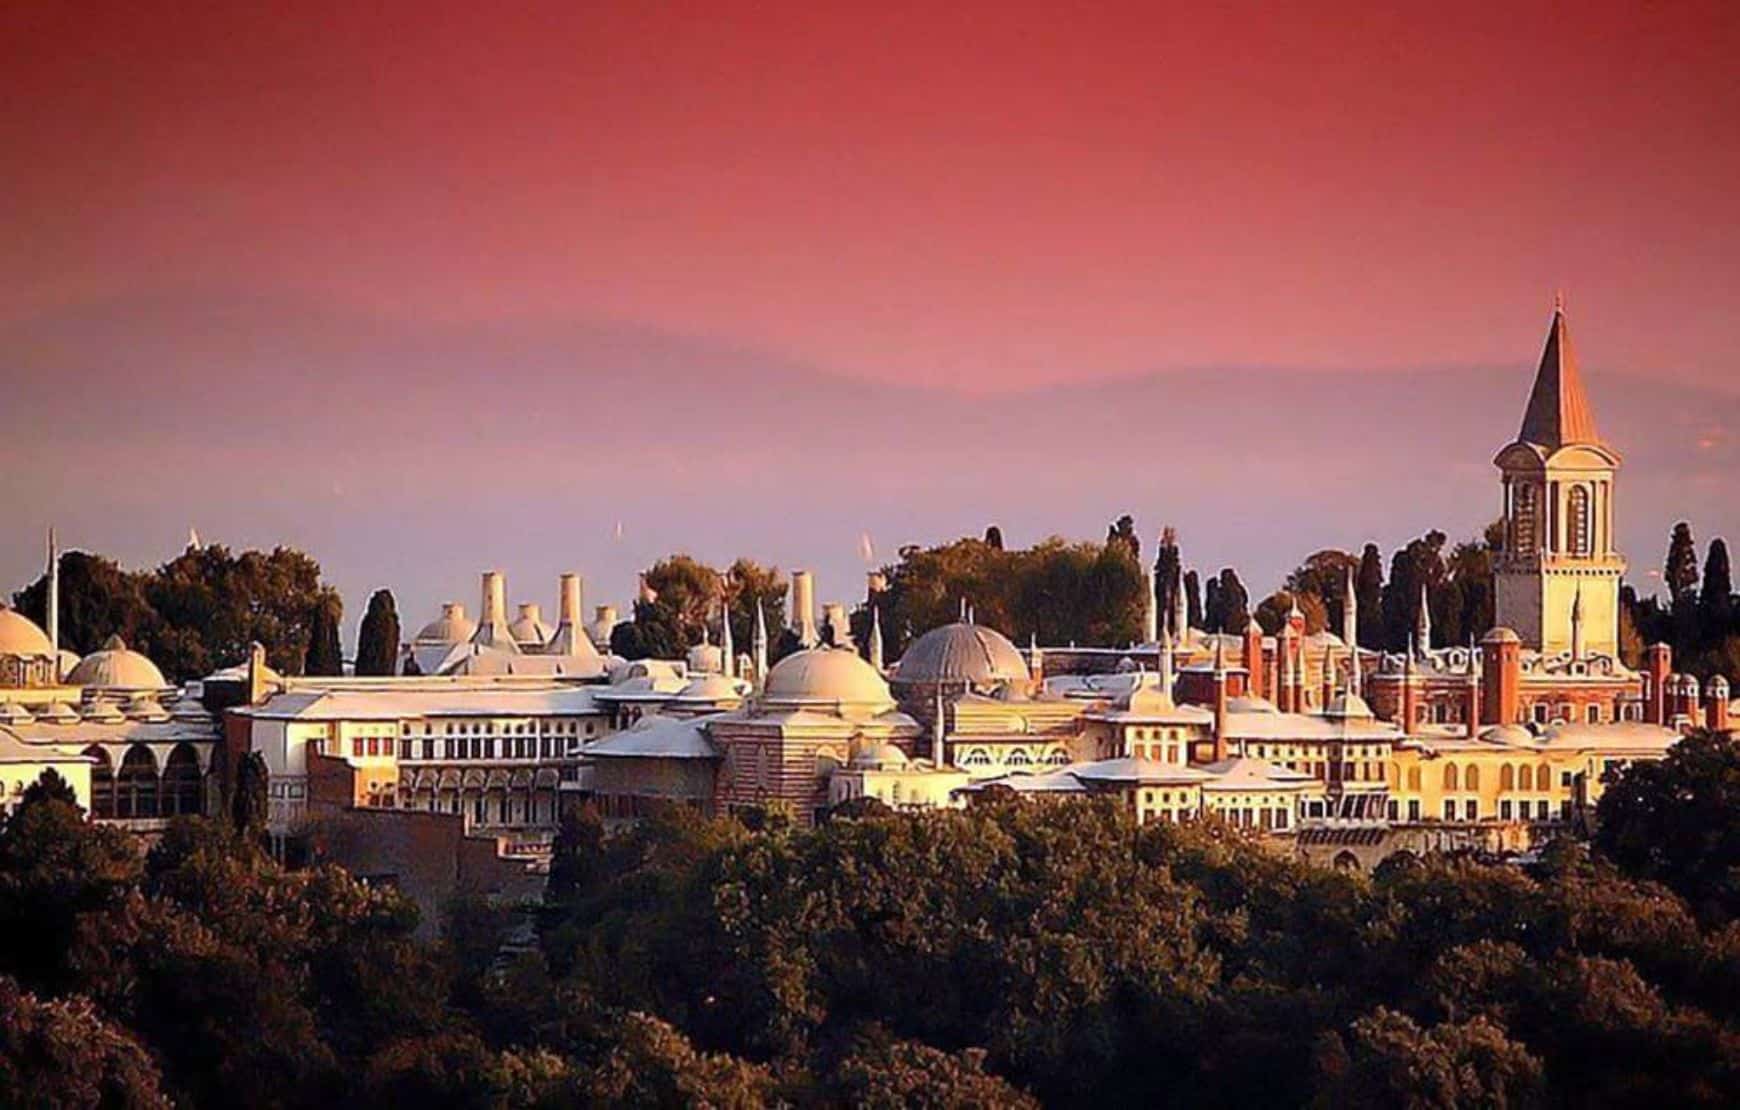 Sunset view of Topkapi Palace at our Ottomon Relics Tour